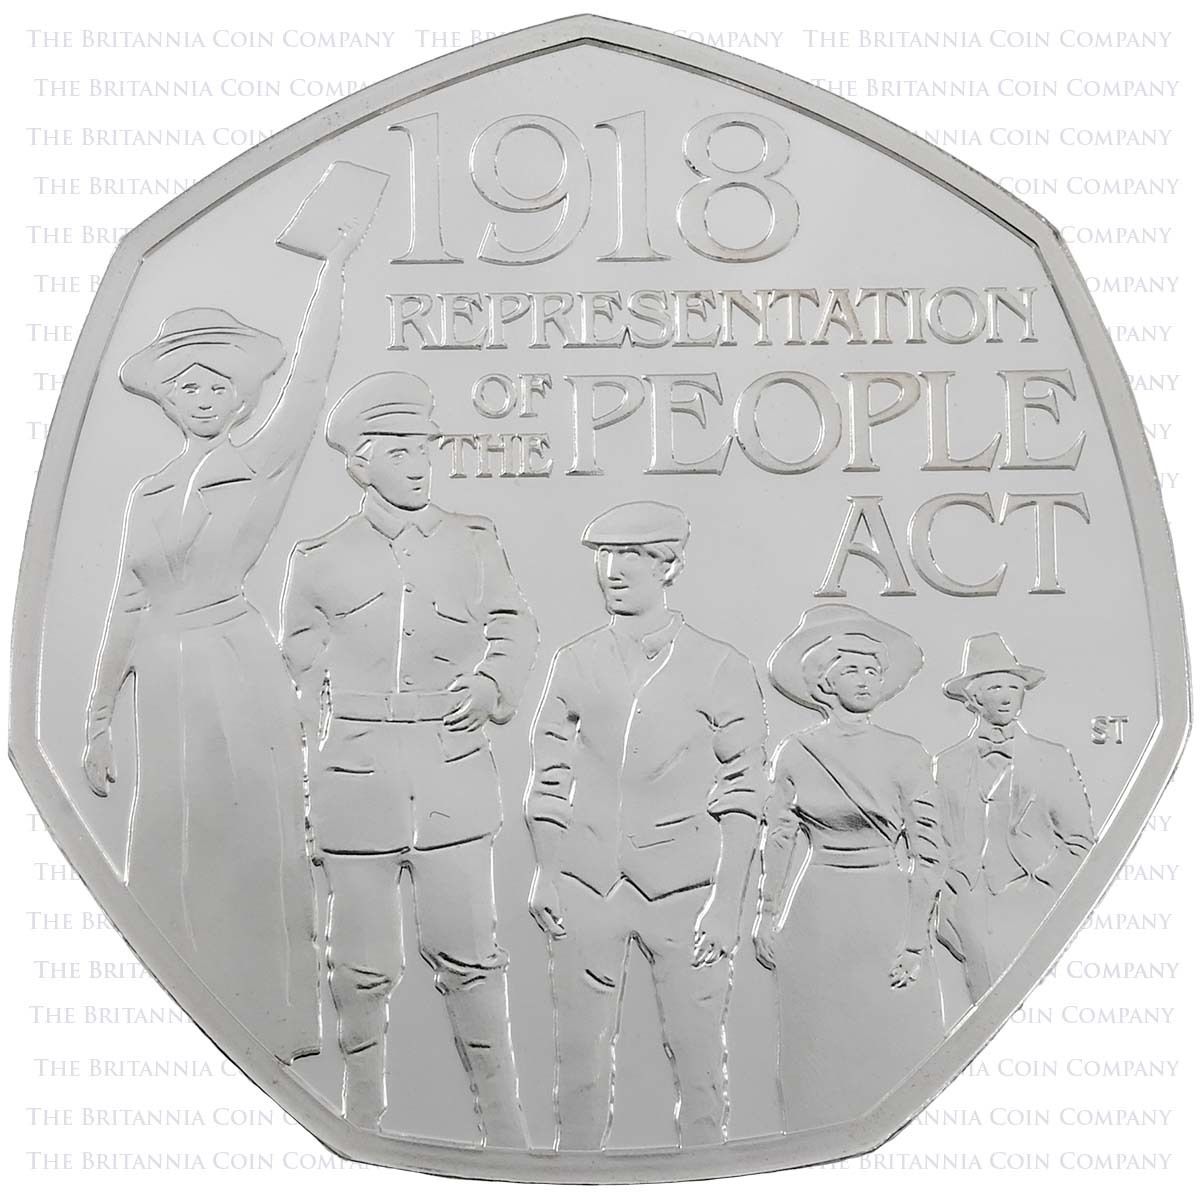 UK18RPSP 2018 Representation of the People Act 50p Silver Proof Reverse